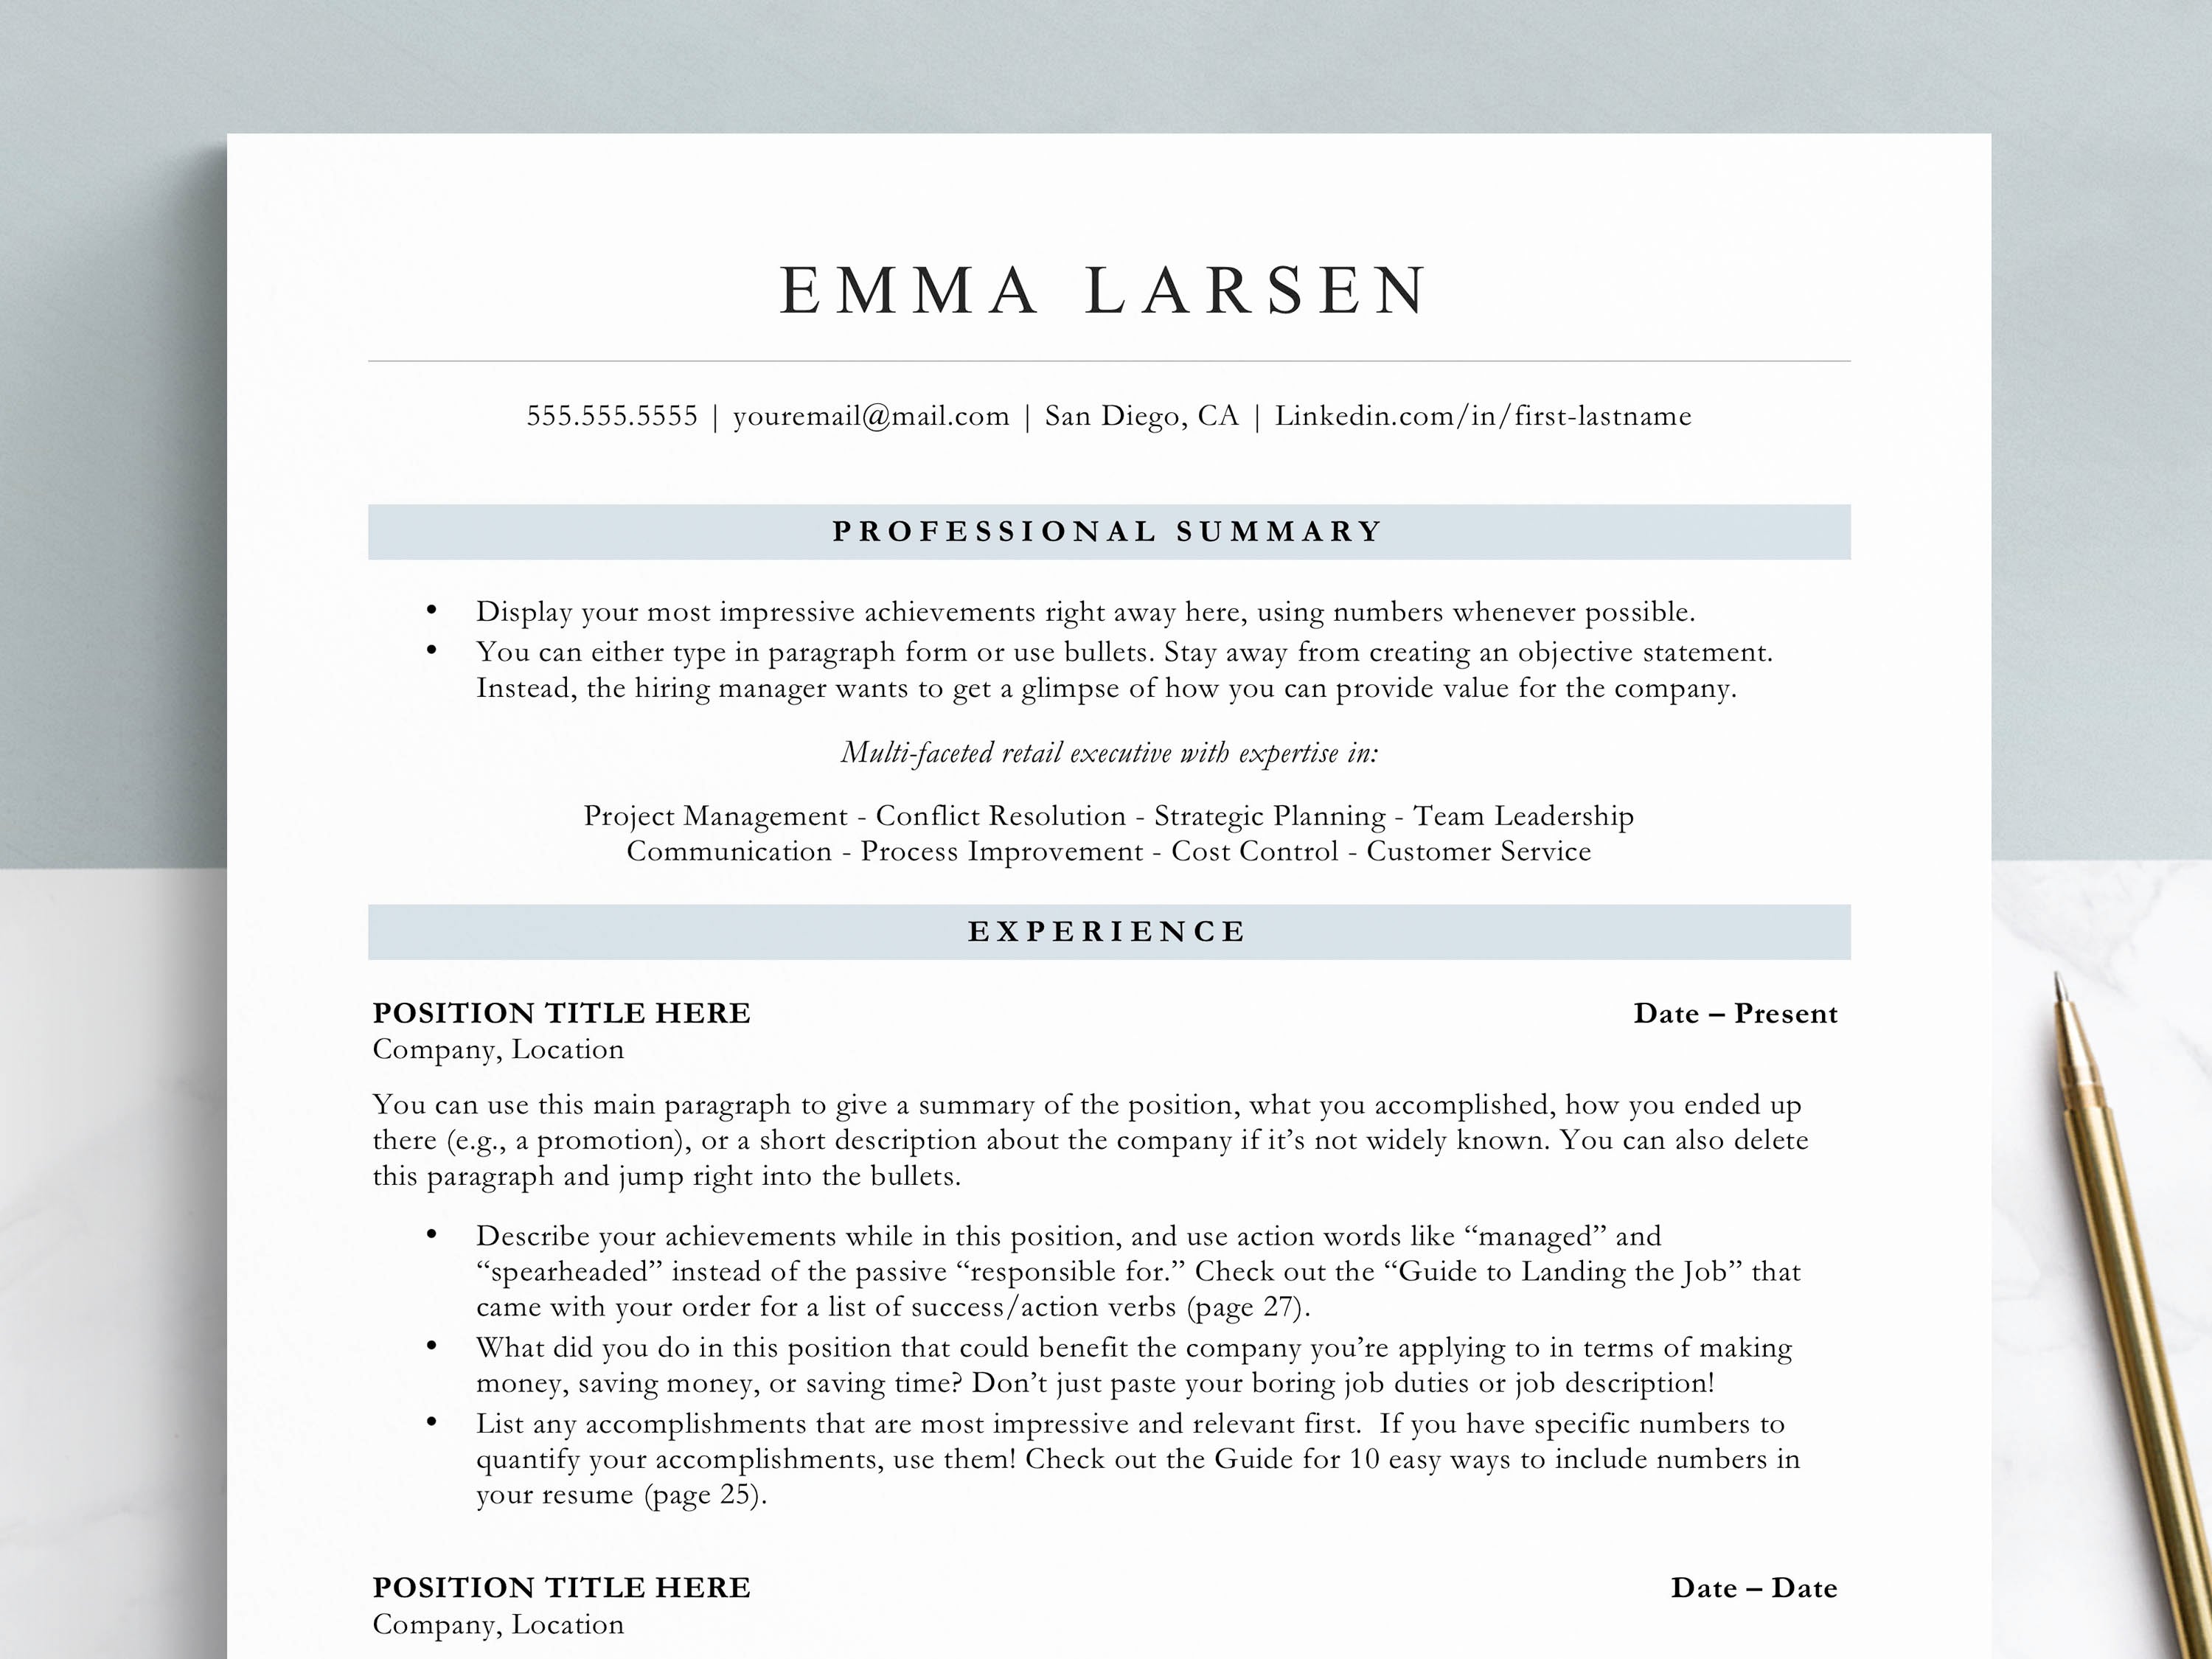 ATS friendly resume template for word, mac pages and google docs